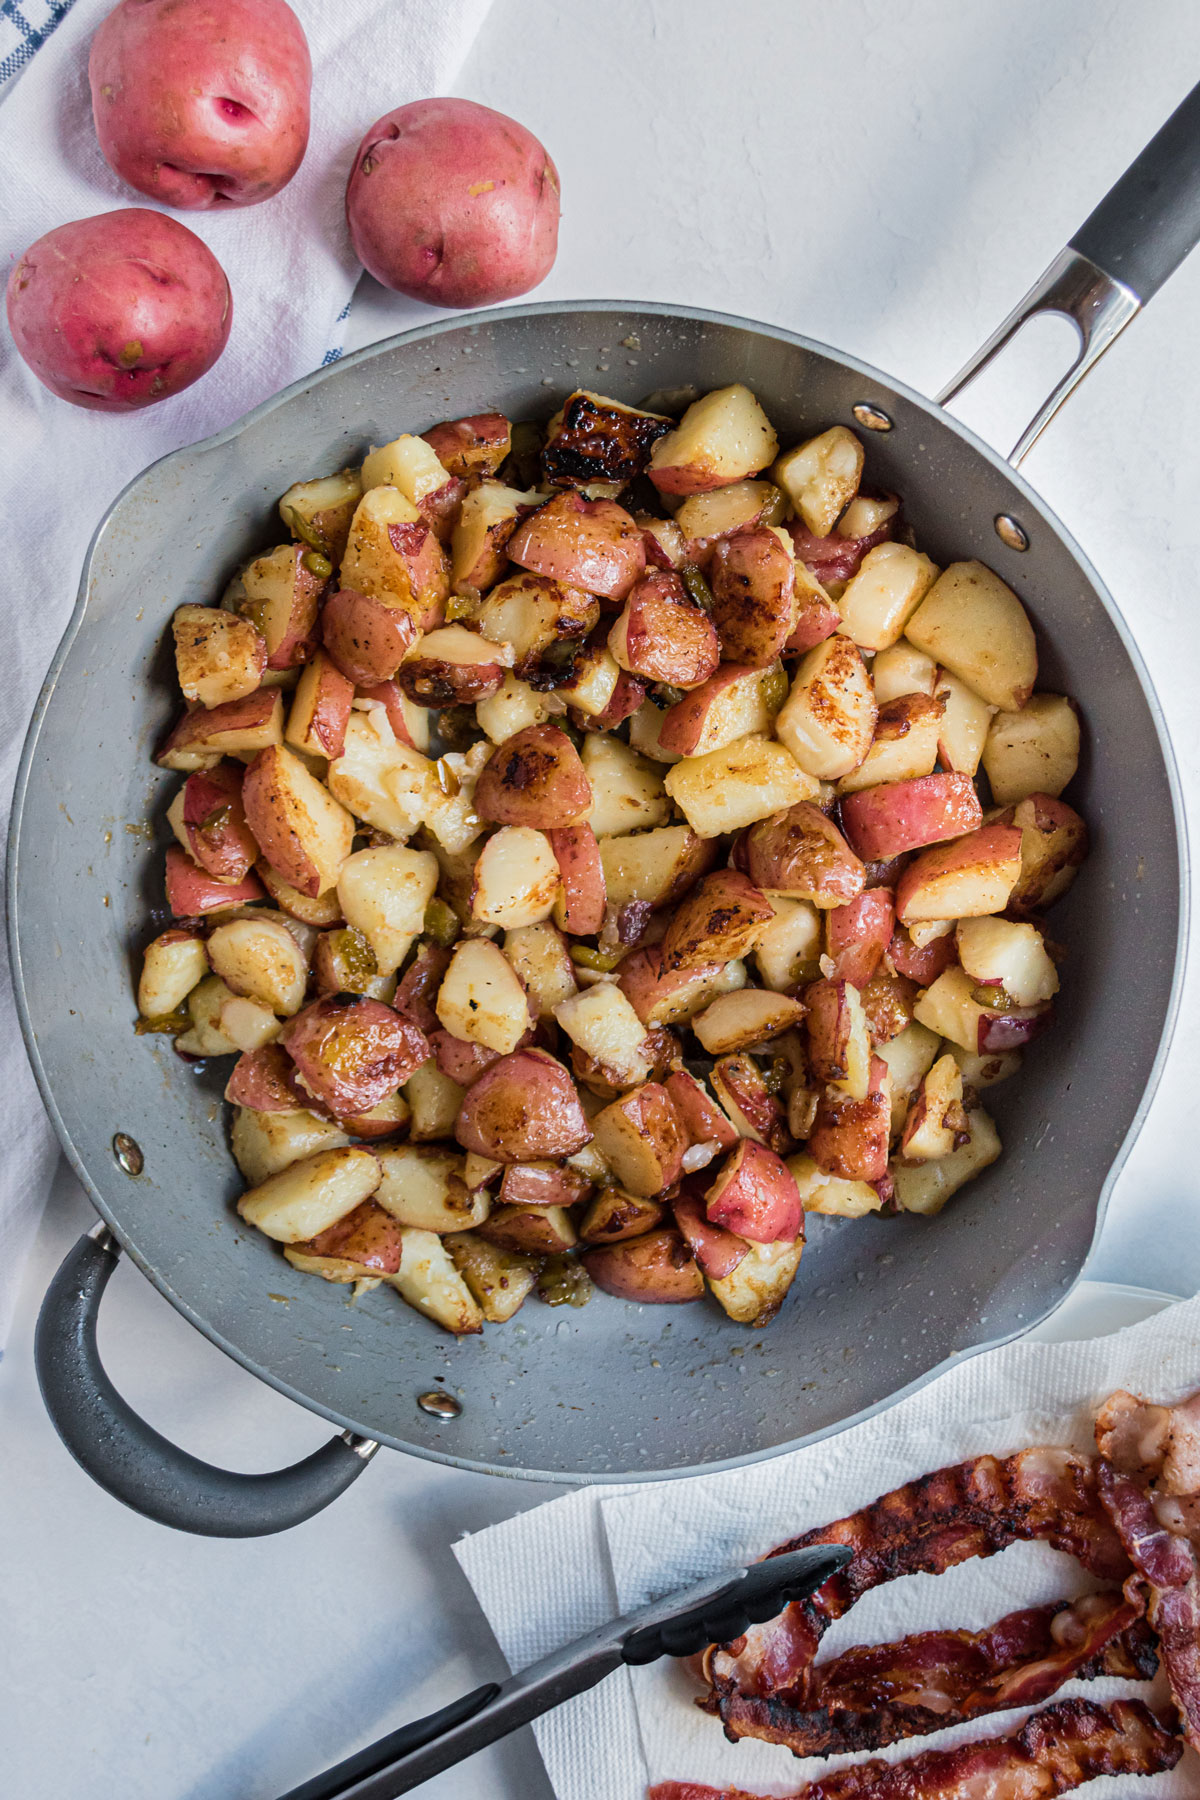 One process of preparing Hot German Potato Salad is to brown the potatoes